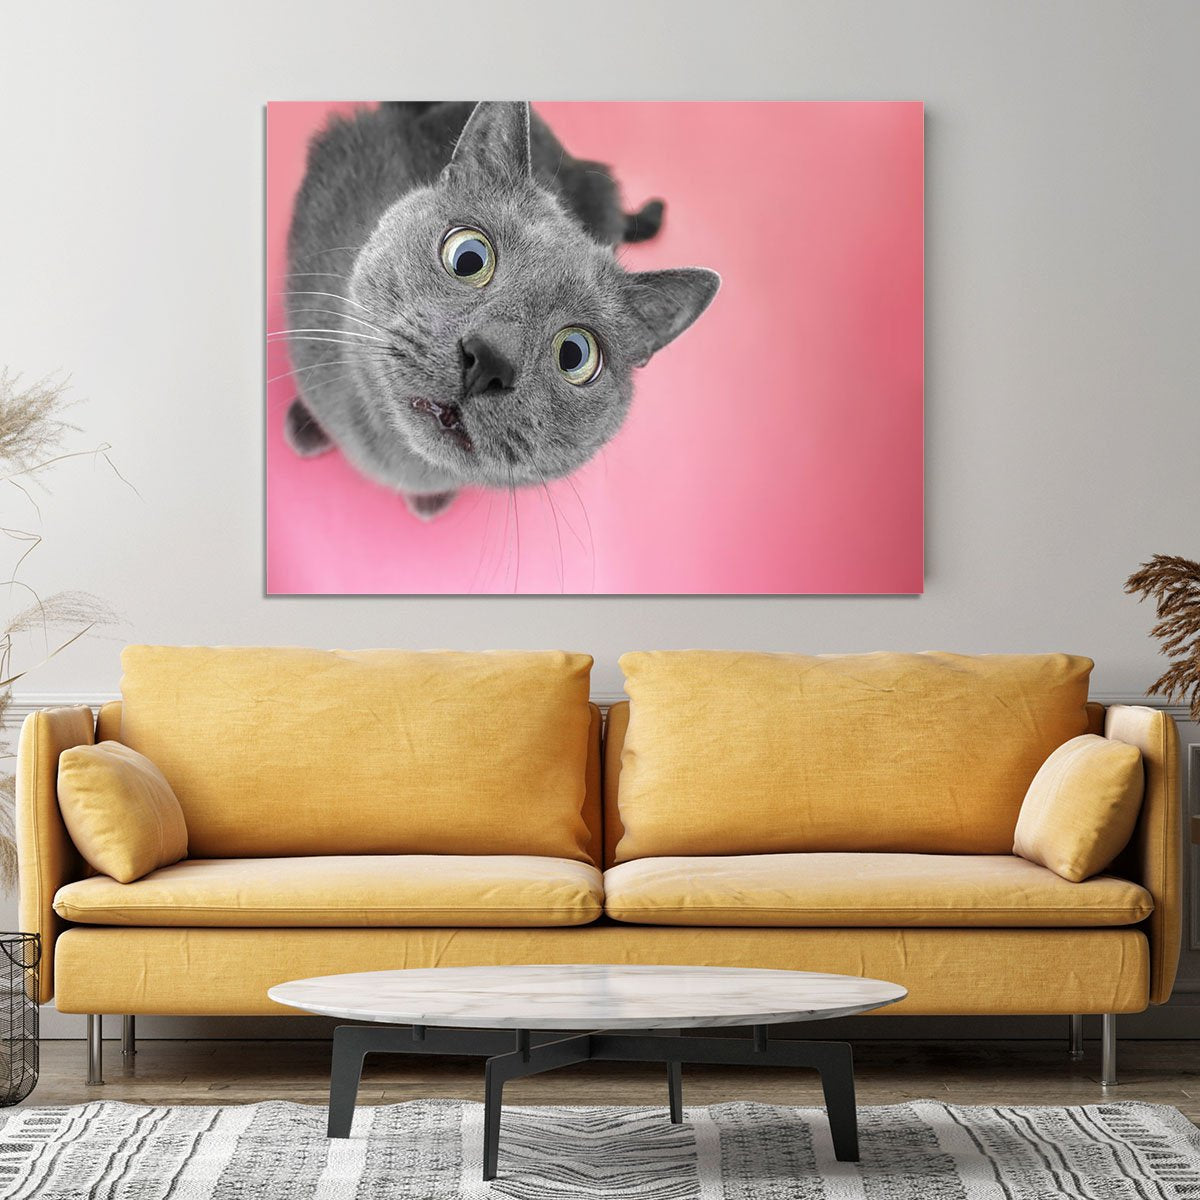 Grey cat sitting on the pink background Canvas Print or Poster